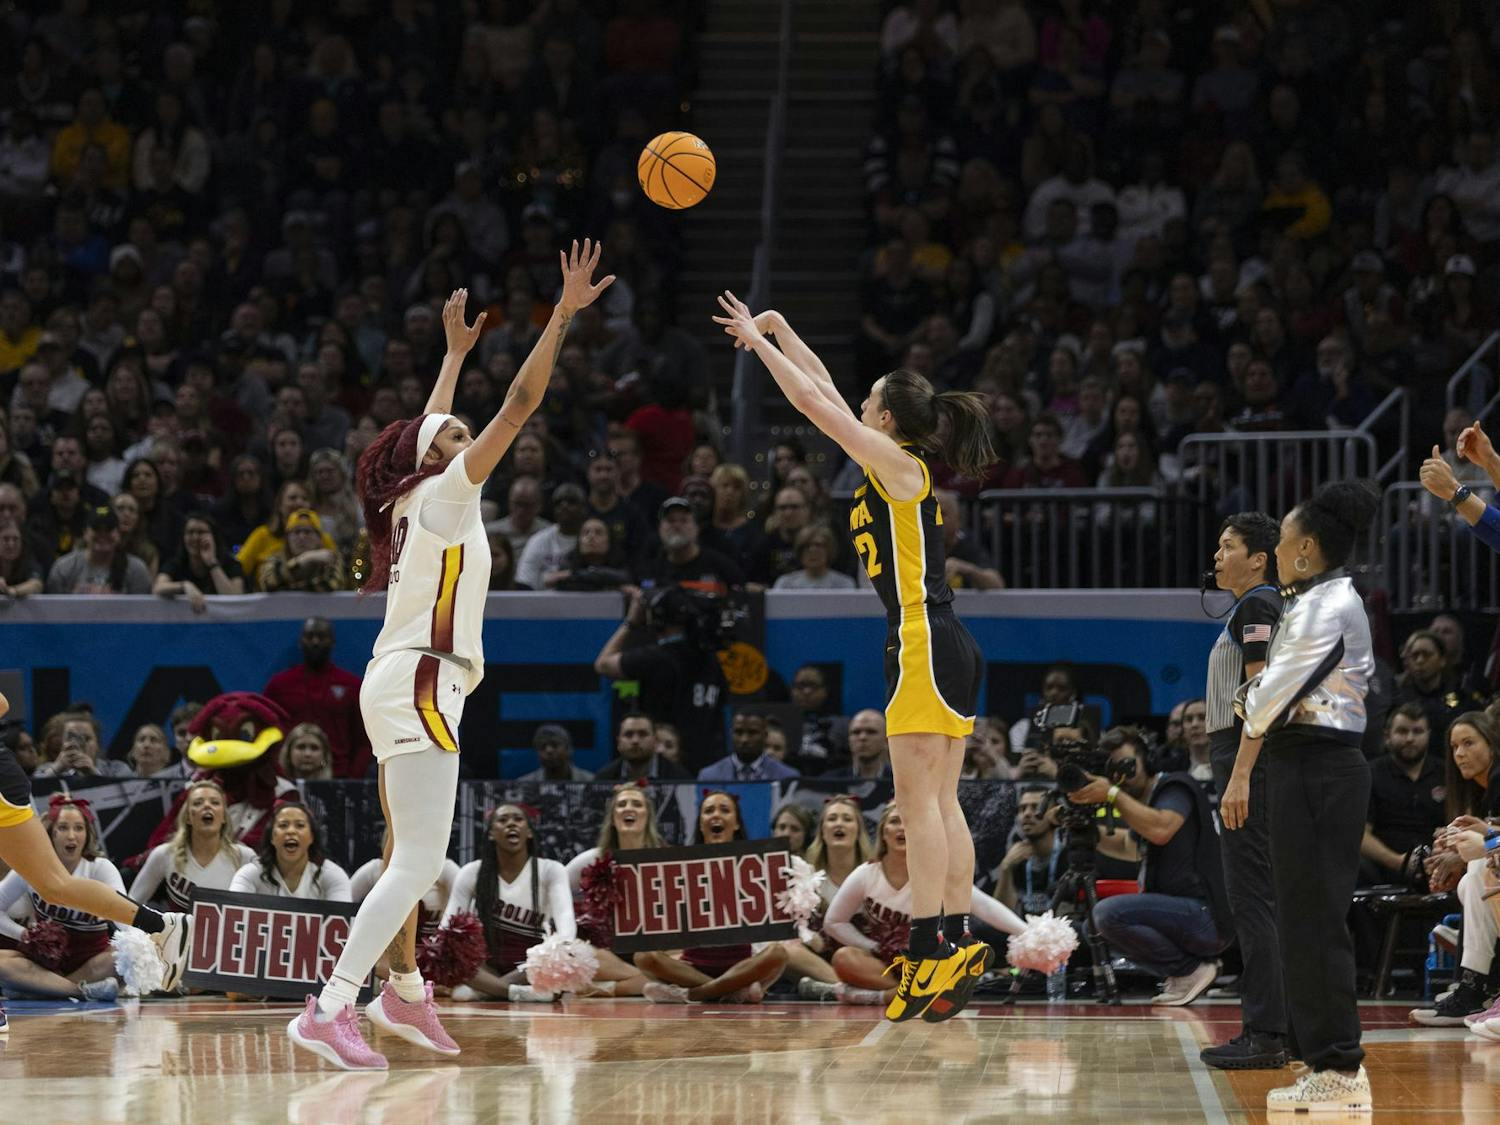 Hawkeye senior guard Caitlin Clark attempts a 3-point shot against the defense of Kamilla Cardoso during the NCAA national championship game on April 7, 2024. Both Clark and Cardoso were named to the NCAA All Tournament team.